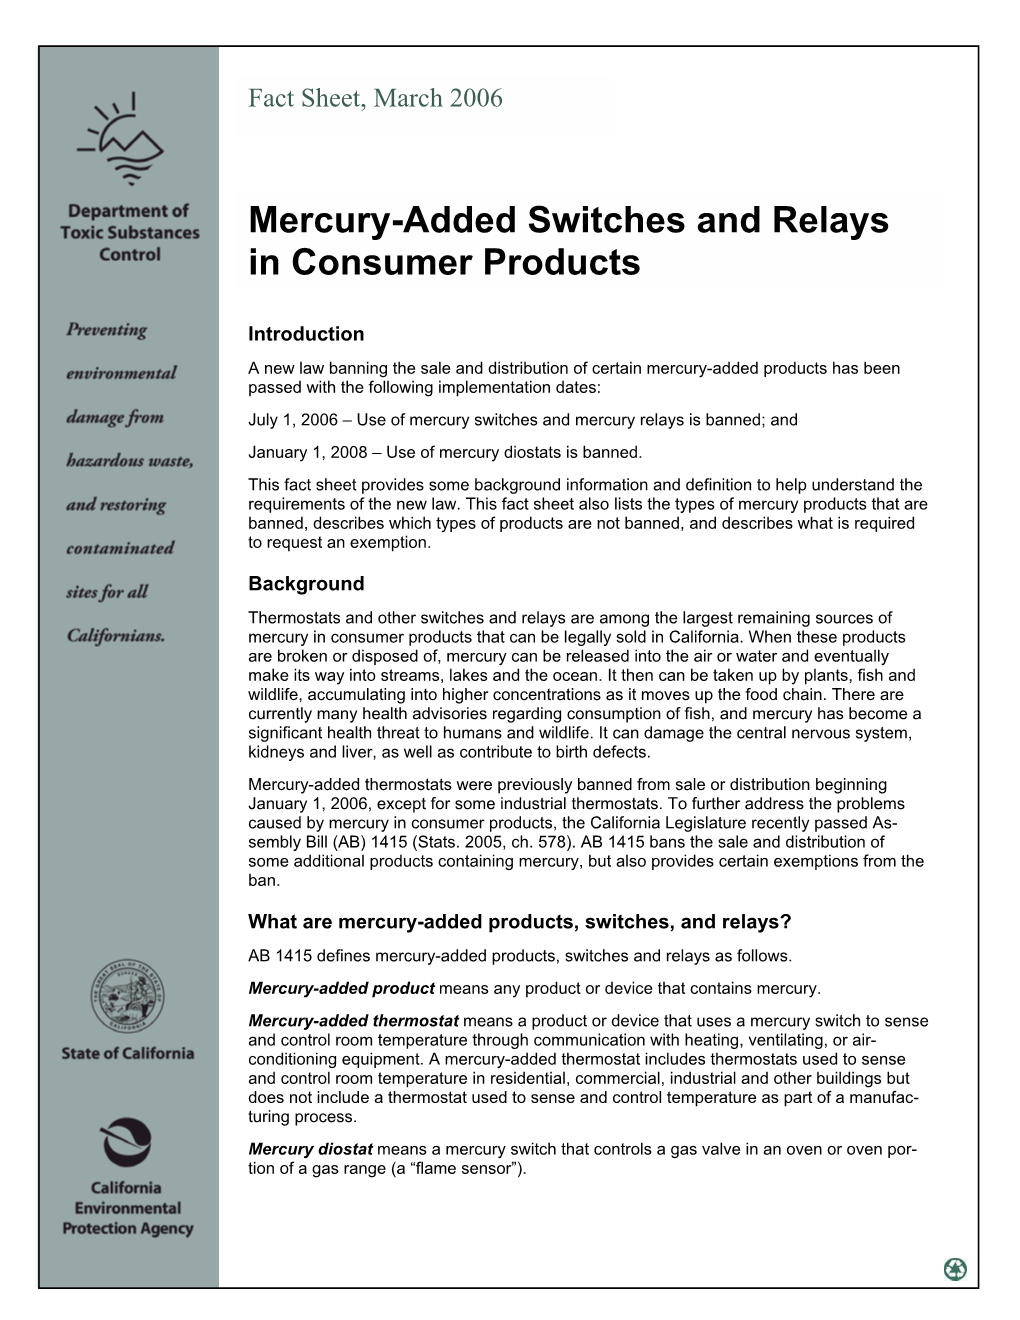 Mercury-Added Switches and Relays in Consumer Products